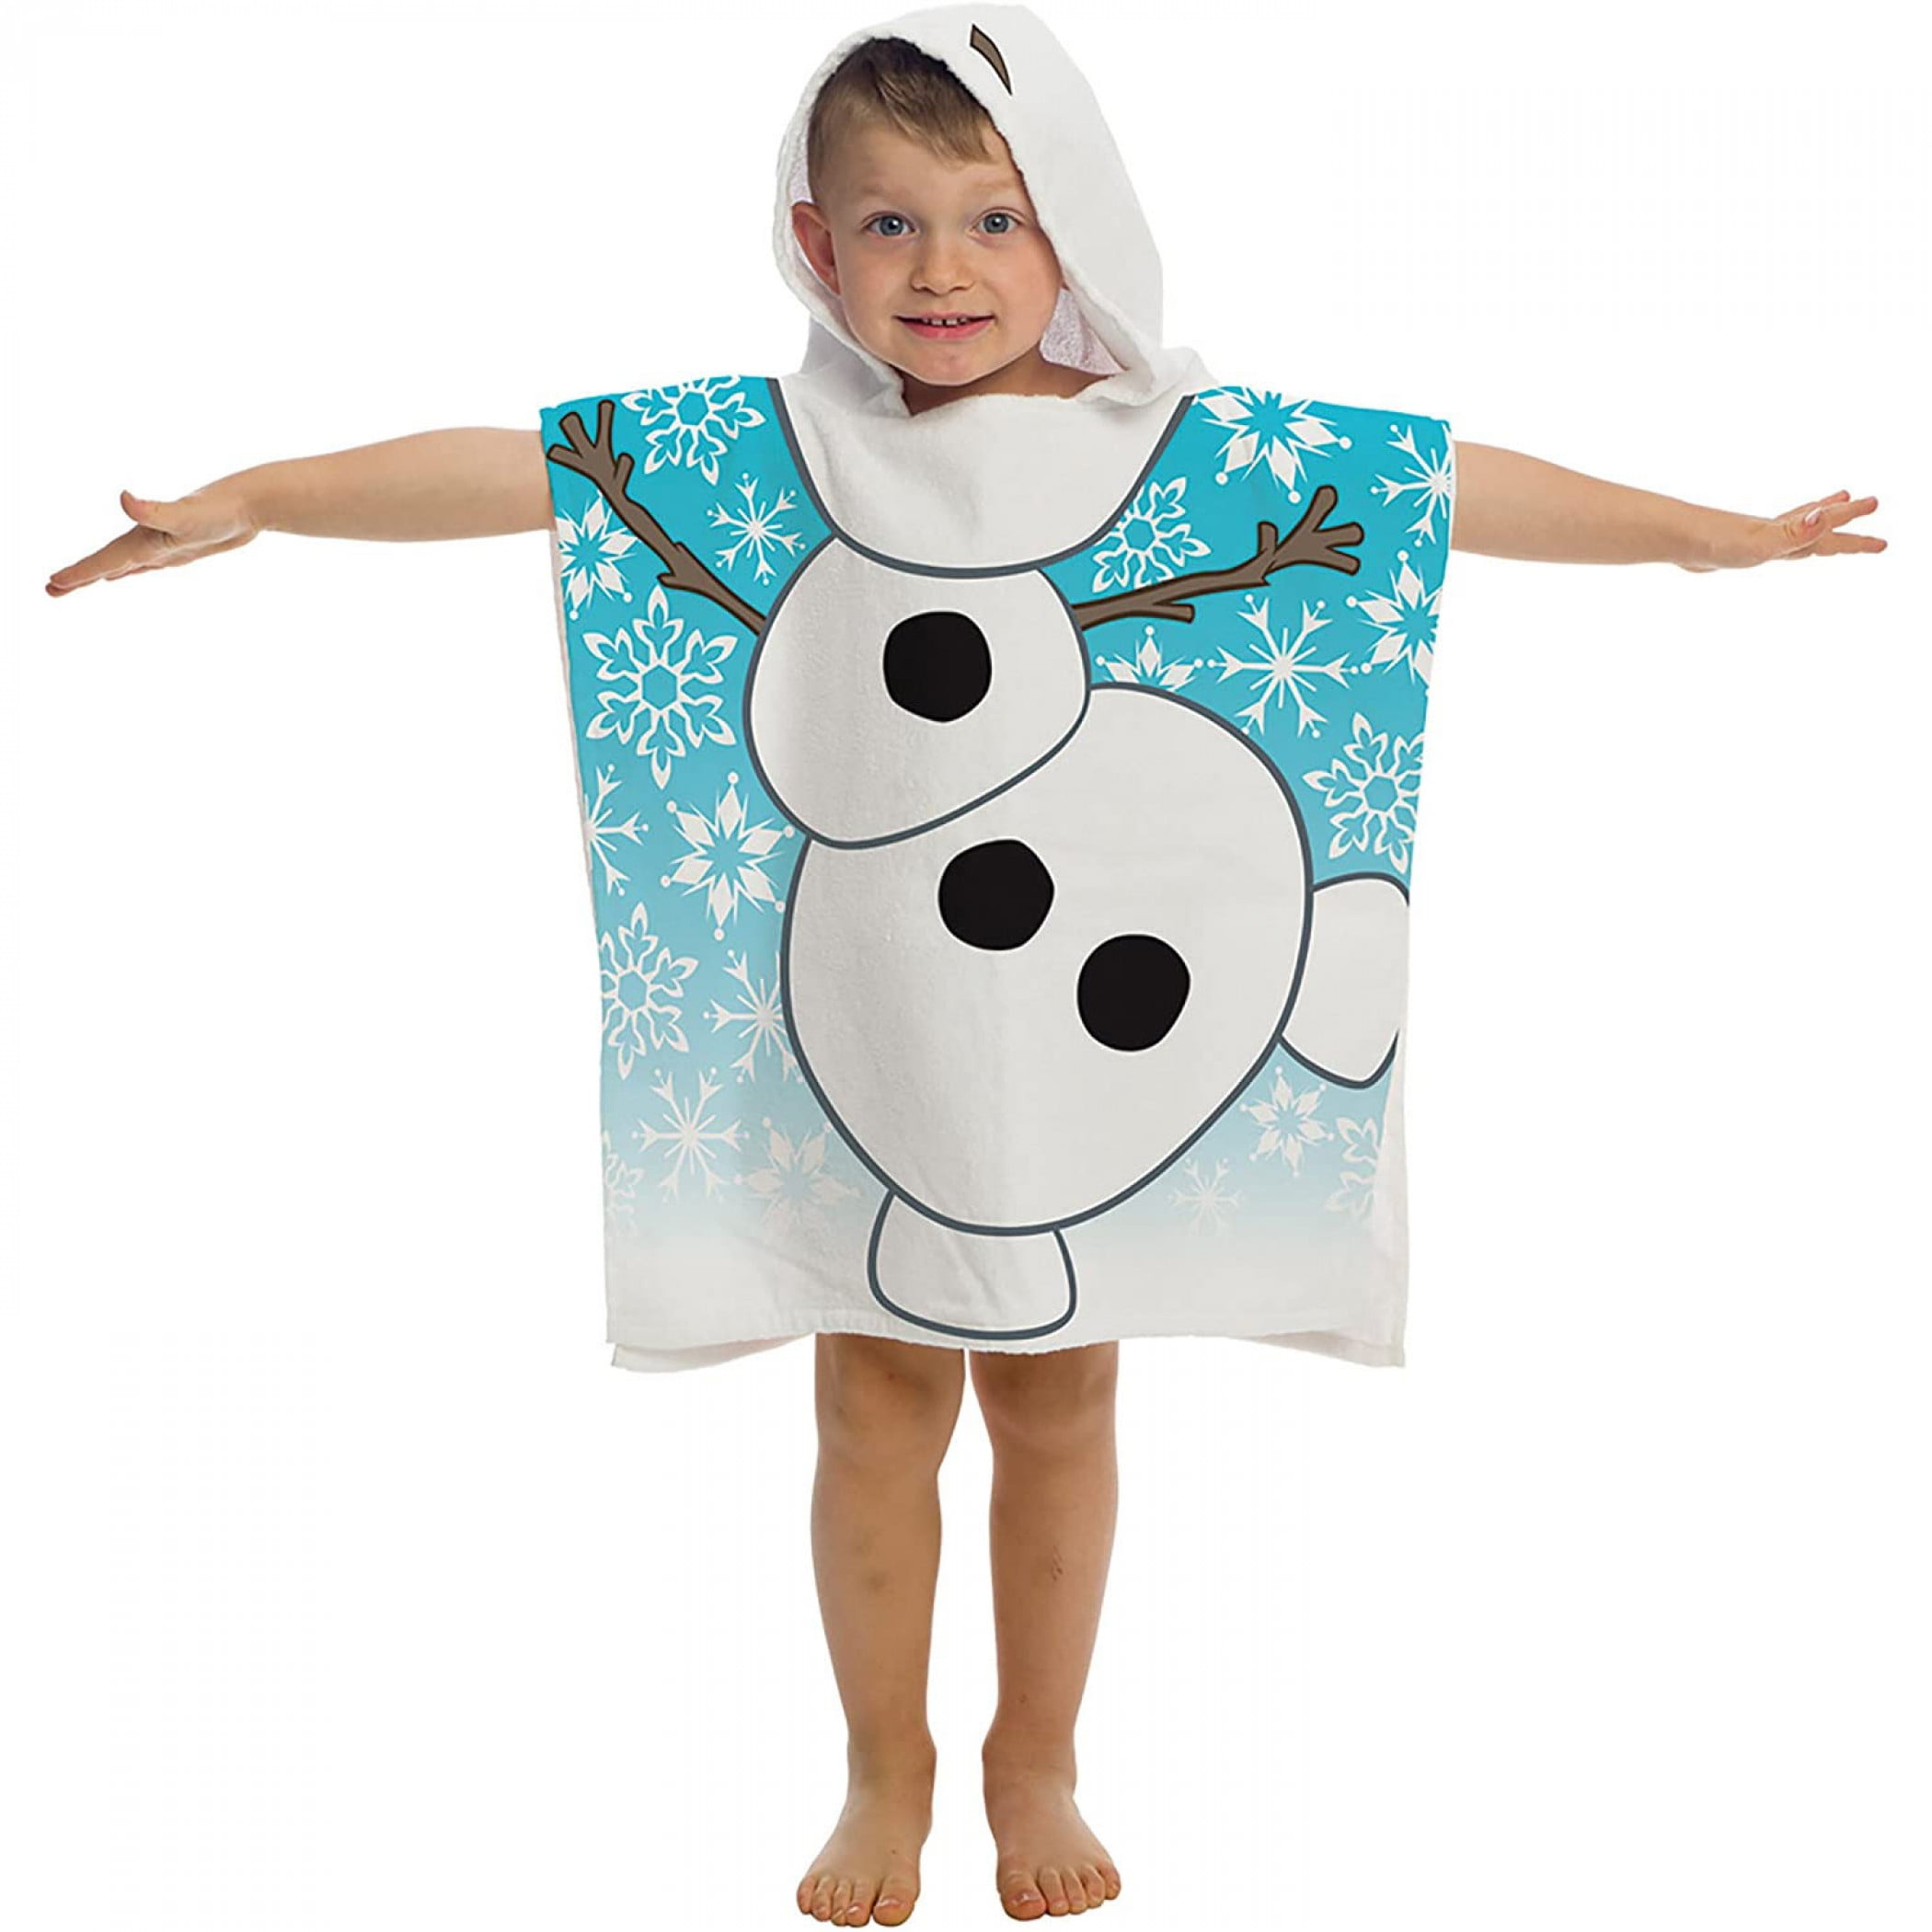 Official Licensed Character Cotton Ponchos Hooded Towels Boys Girls Kids Gift 